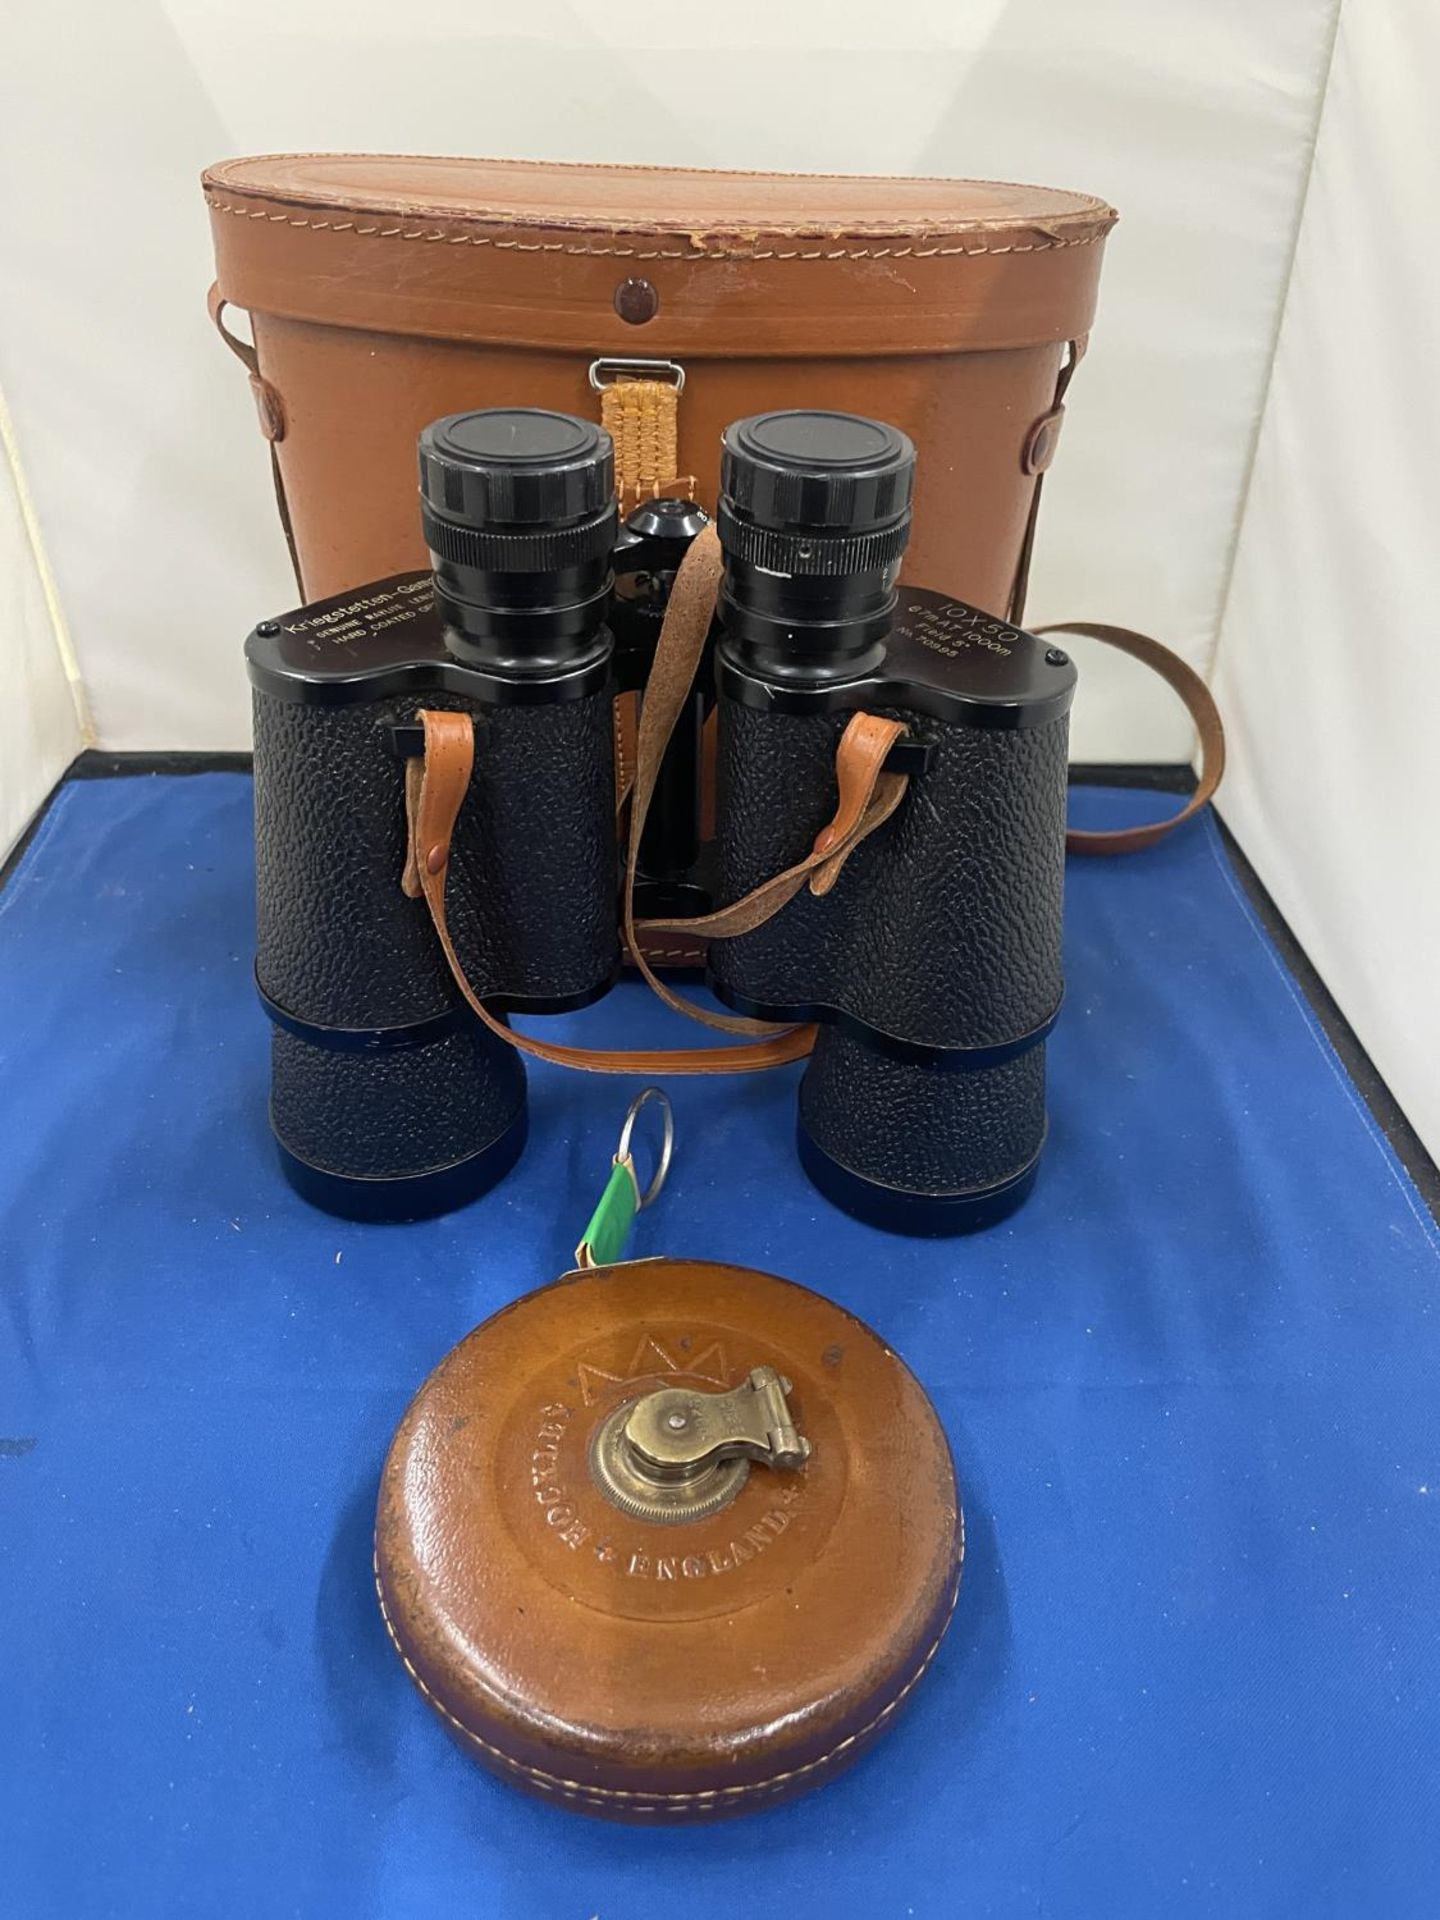 A PAIR OF KRIEGSTETTEN - GAMA BINOCULARS IN A LEATHER CASE WITH A VINTAGE LEATHER TAPE MEASURE - Image 2 of 8